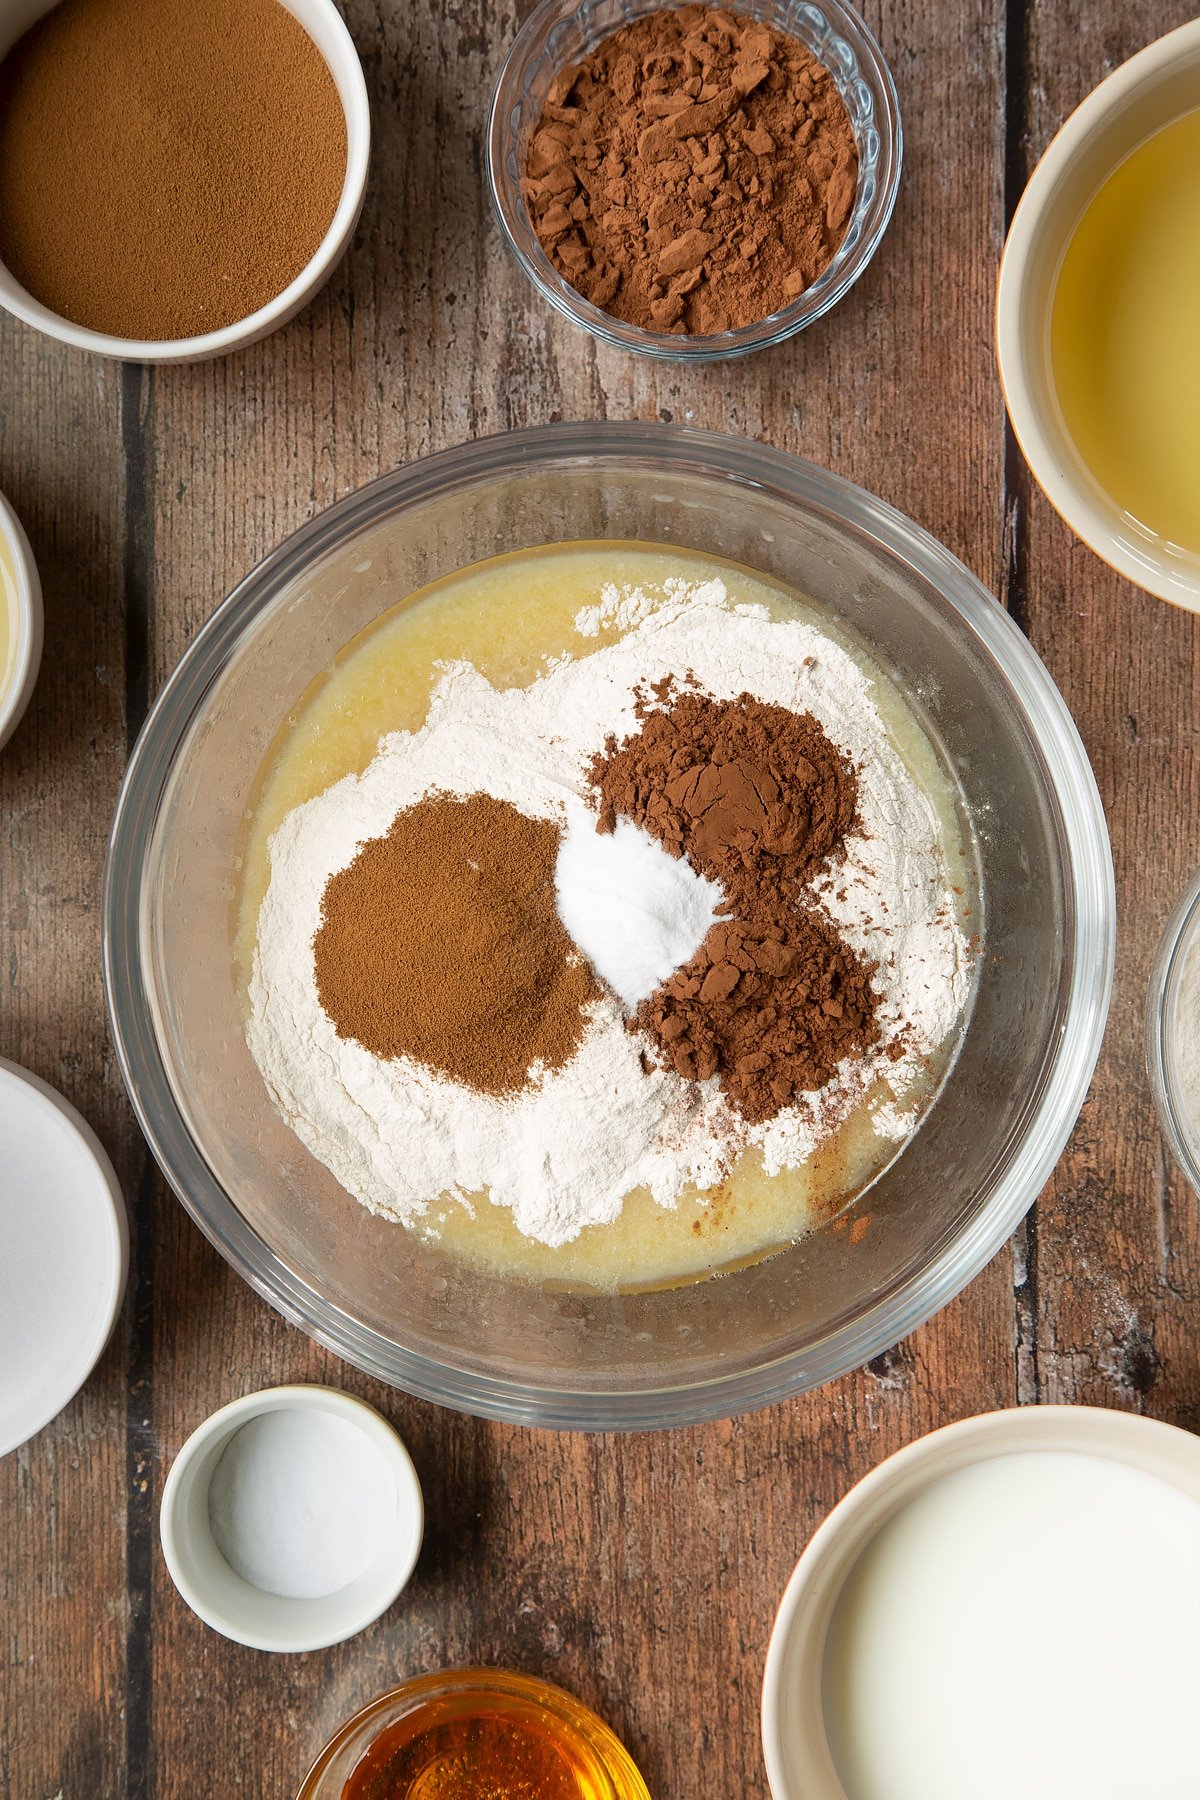 Eggs, sugar, oil, milk and golden syrup whisked together in a glass mixing bowl with flour, cocoa, instant coffee and bicarbonate of soda on top. Surrounding the bowl is ingredients to make dalgona coffee cake.